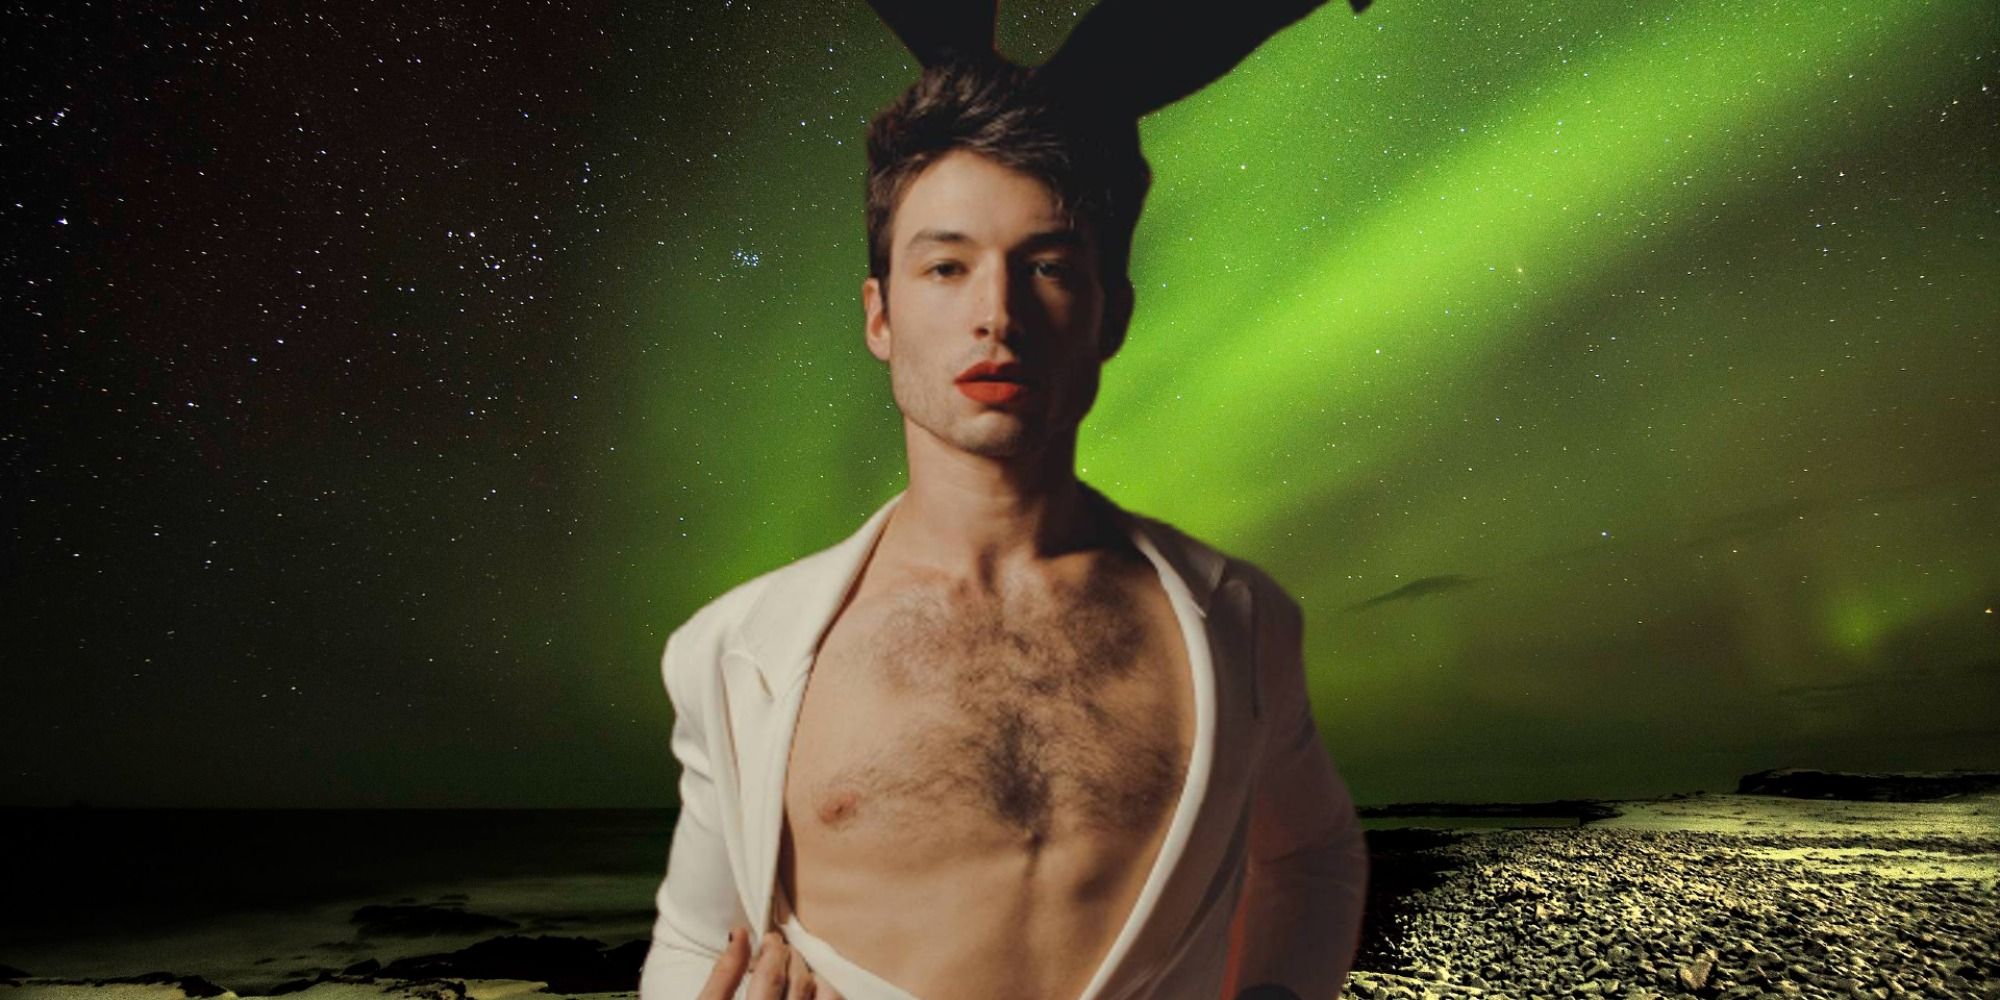 Ezra Miller Playboy photo with Iceland northern lights background